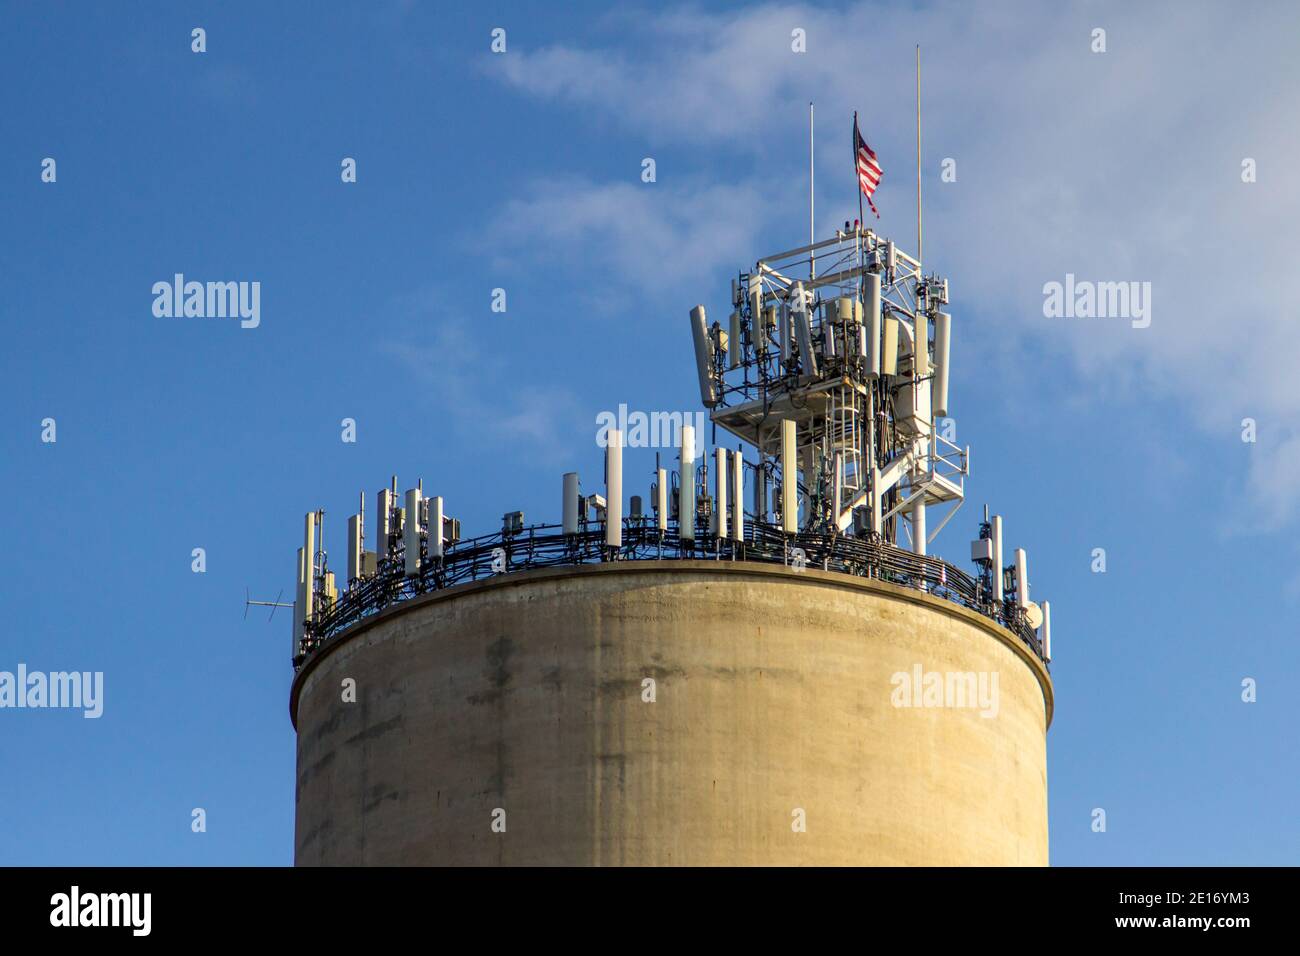 Tradition Meets Technology. 5G cell phone tower on top of an old barn silo. Stock Photo